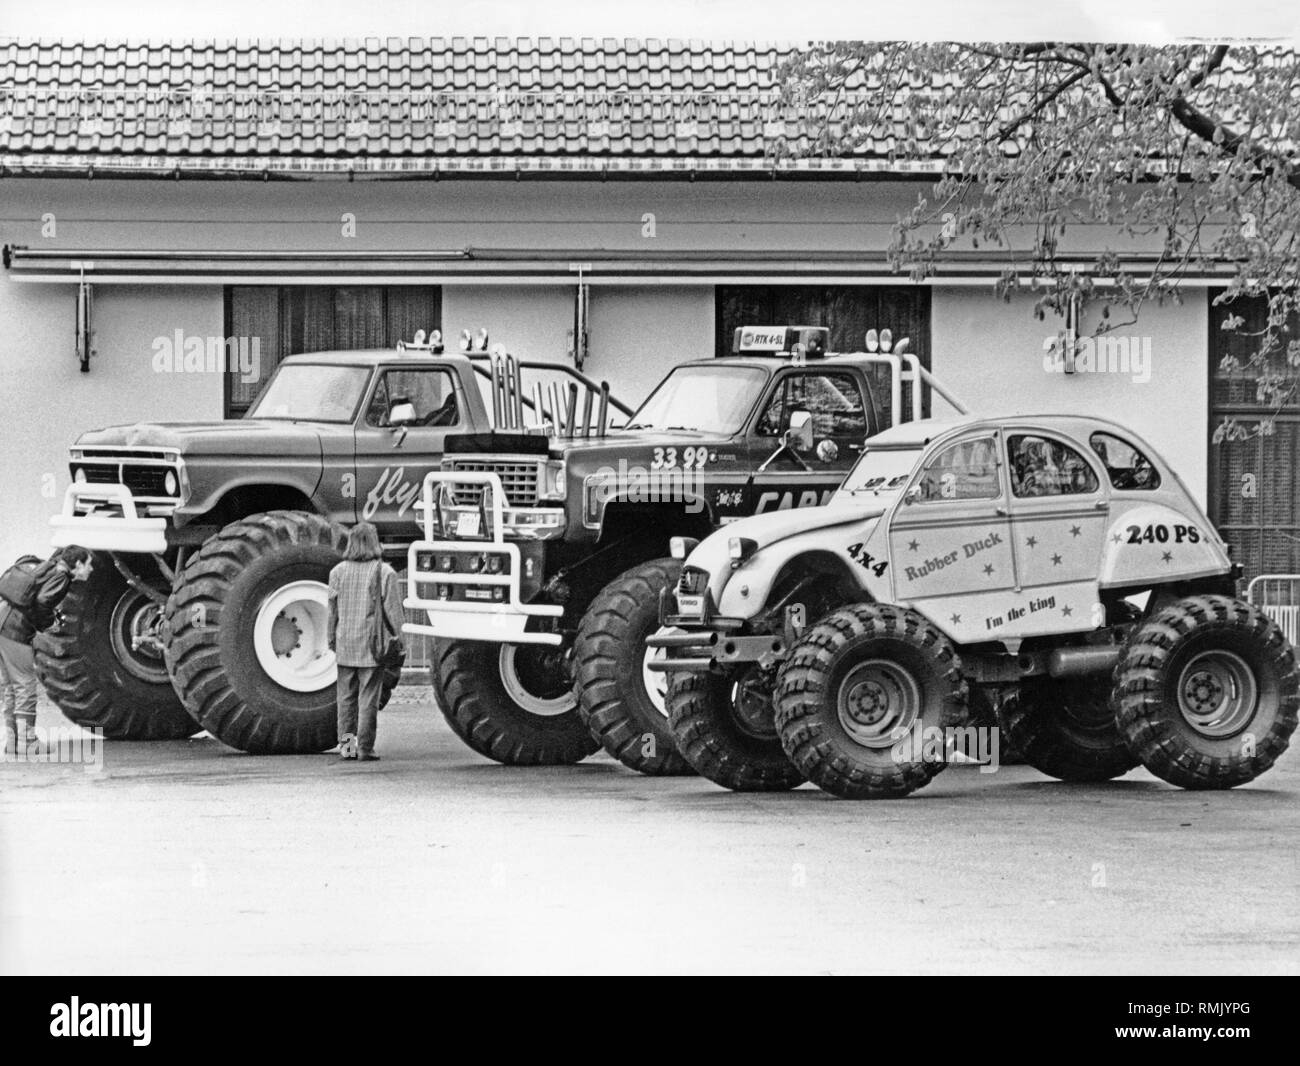 Three cars that were displayed at the largest European SUV exhibition in Munich. In front a Citroen 2CV with truck tires and a 240 HP engine. In the middle a Chevrolet Cheyenne, year of construction 1976. In the back, a Ford F-100, year of construction 1973. Stock Photo